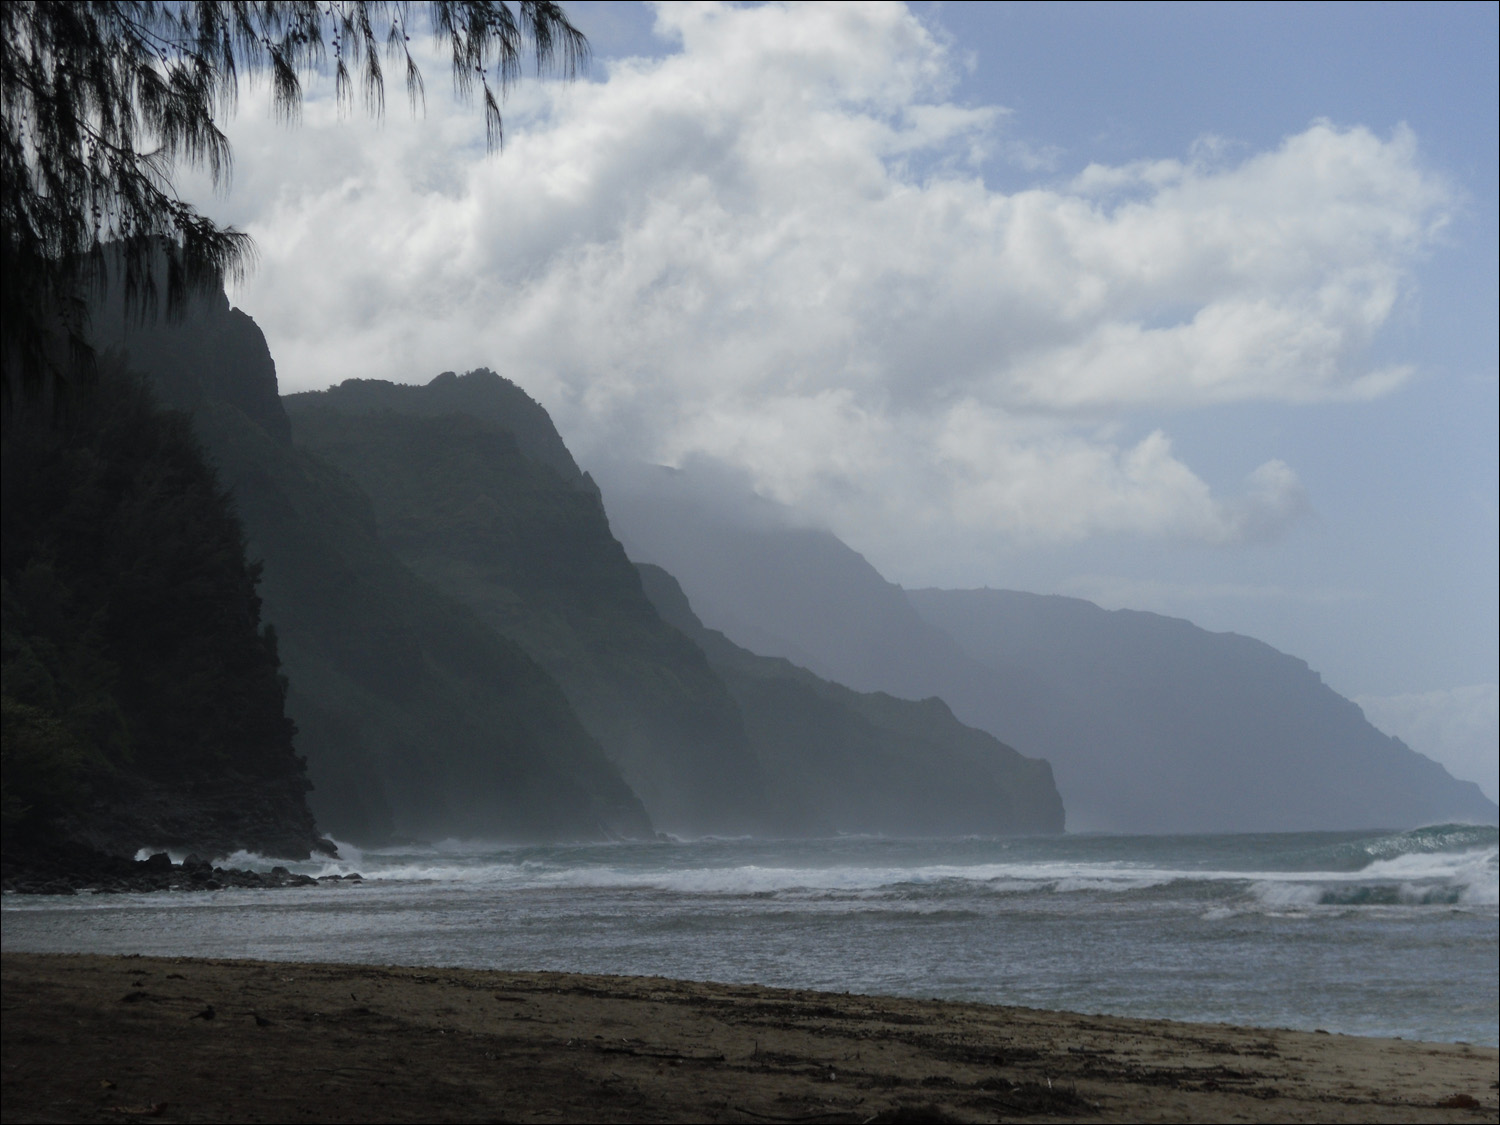 Pictures from Ke'e beach located at Haena State Park